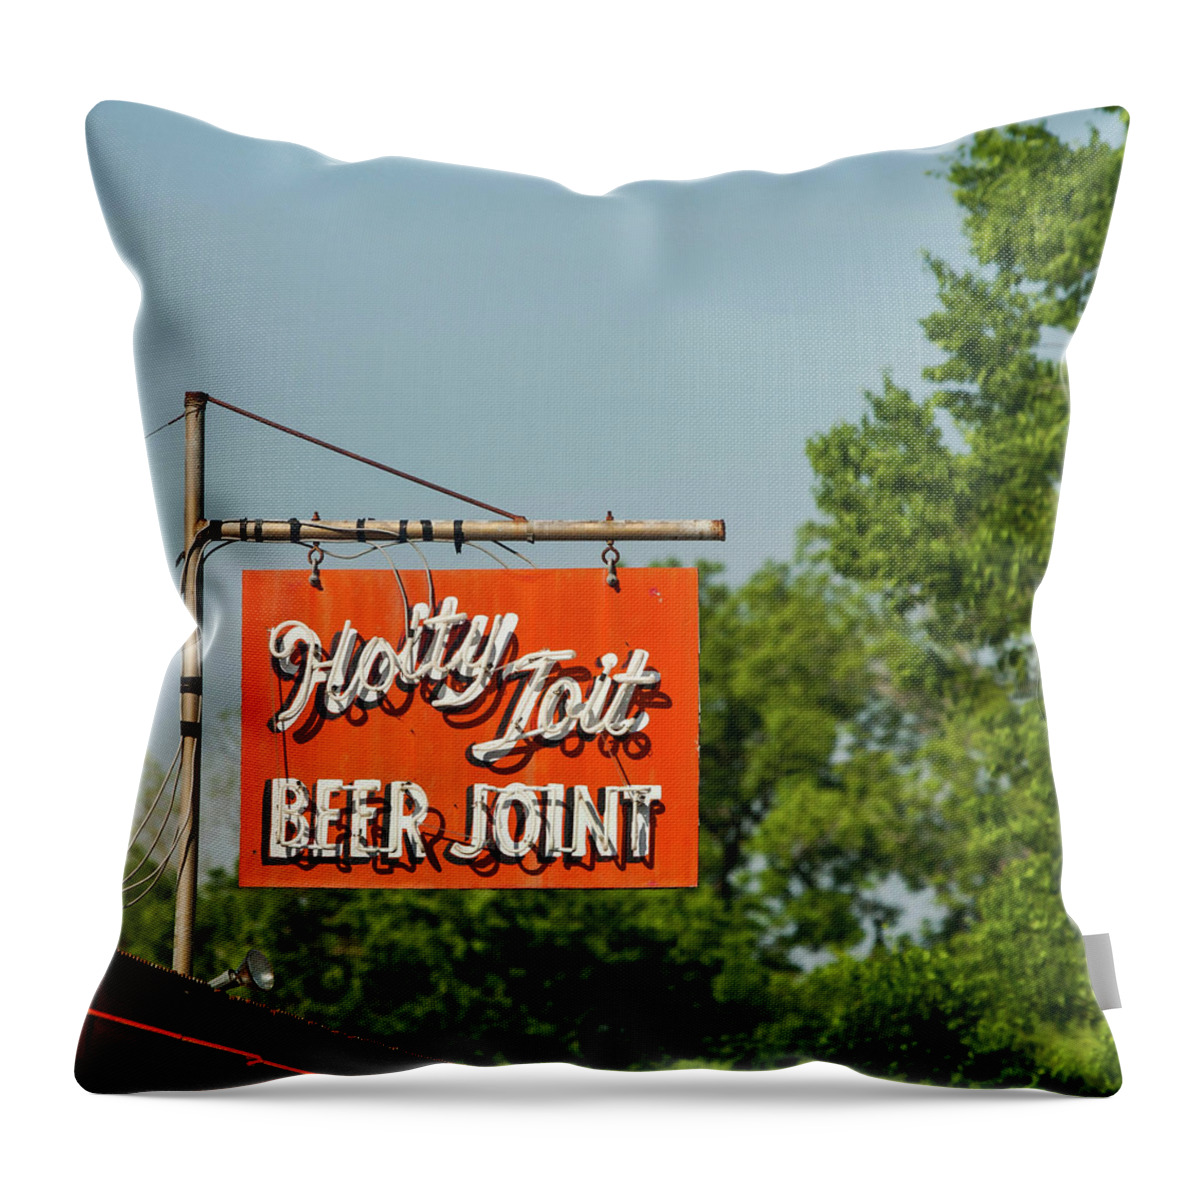 Beer Signs Throw Pillow featuring the photograph Texas Beer Joint by Art Block Collections